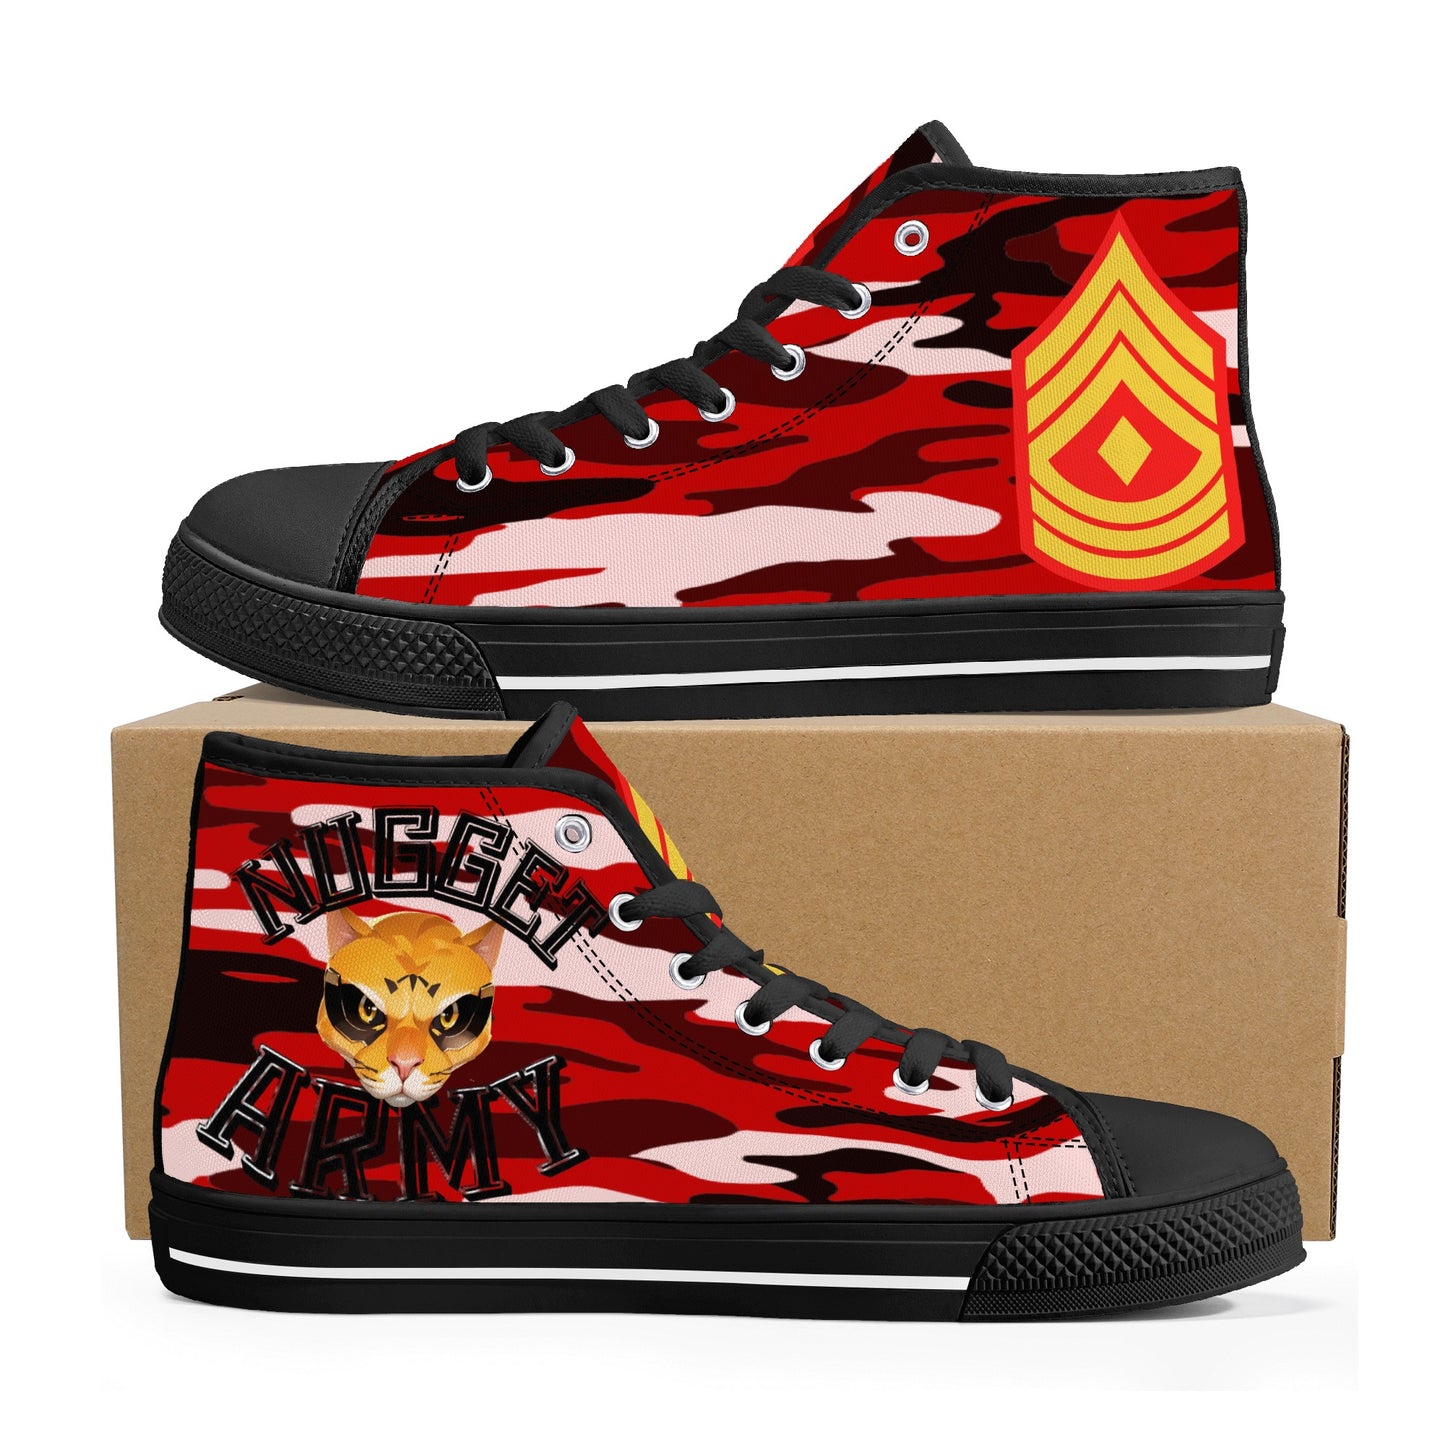 Stand out  with the  Nugget Army Mens High Top Canvas Shoes  available at Hey Nugget. Grab yours today!